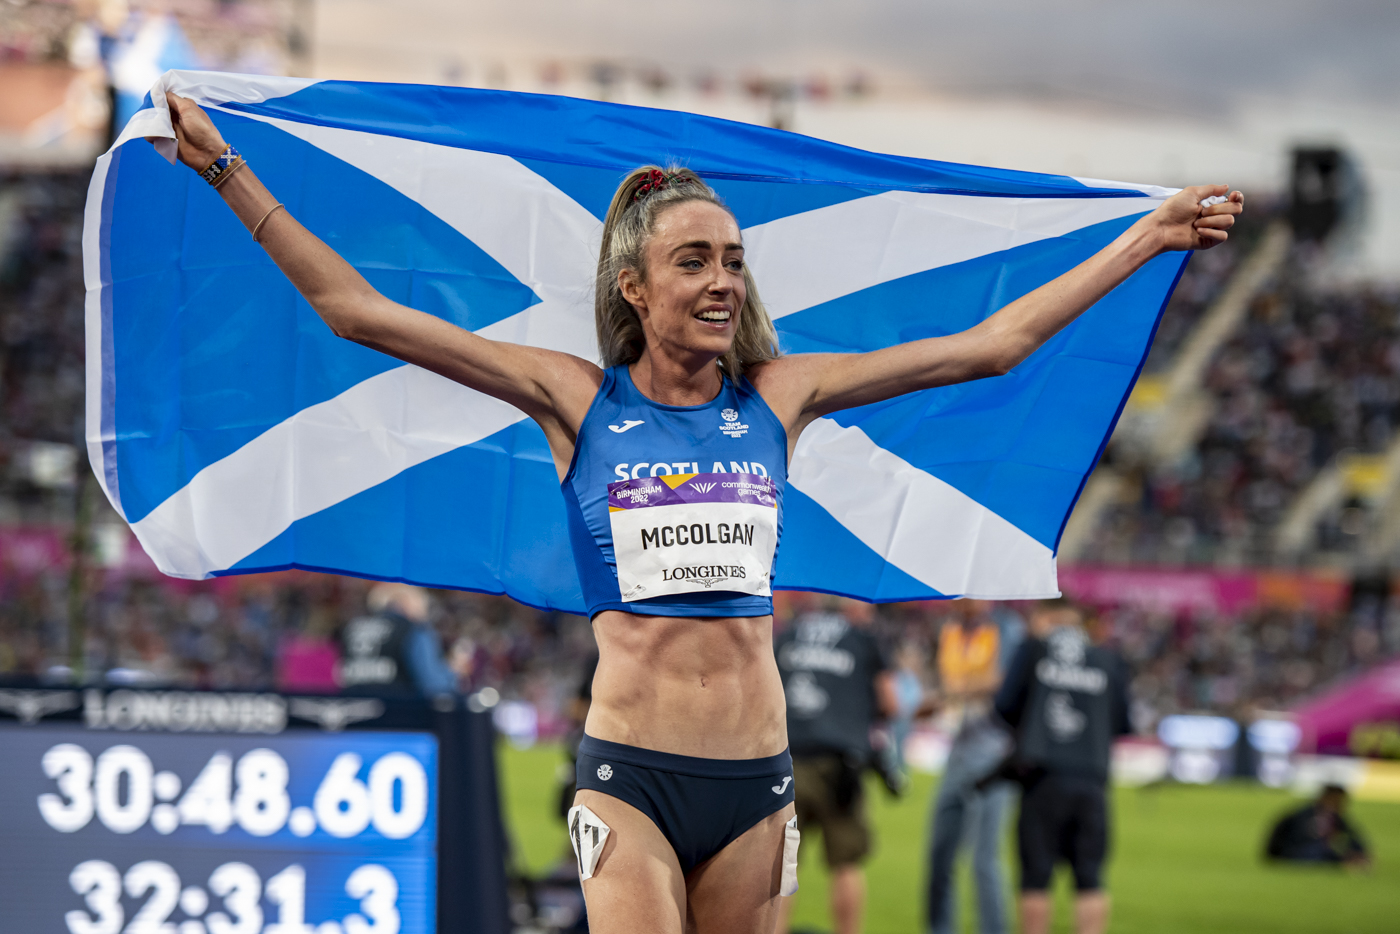 Elinor Middlemiss led Scotland to its second best Commonwealth Games performance at Birmingham 2022 where the team's gold medallists included Eilish McColgan in the 10,000m ©Getty Images